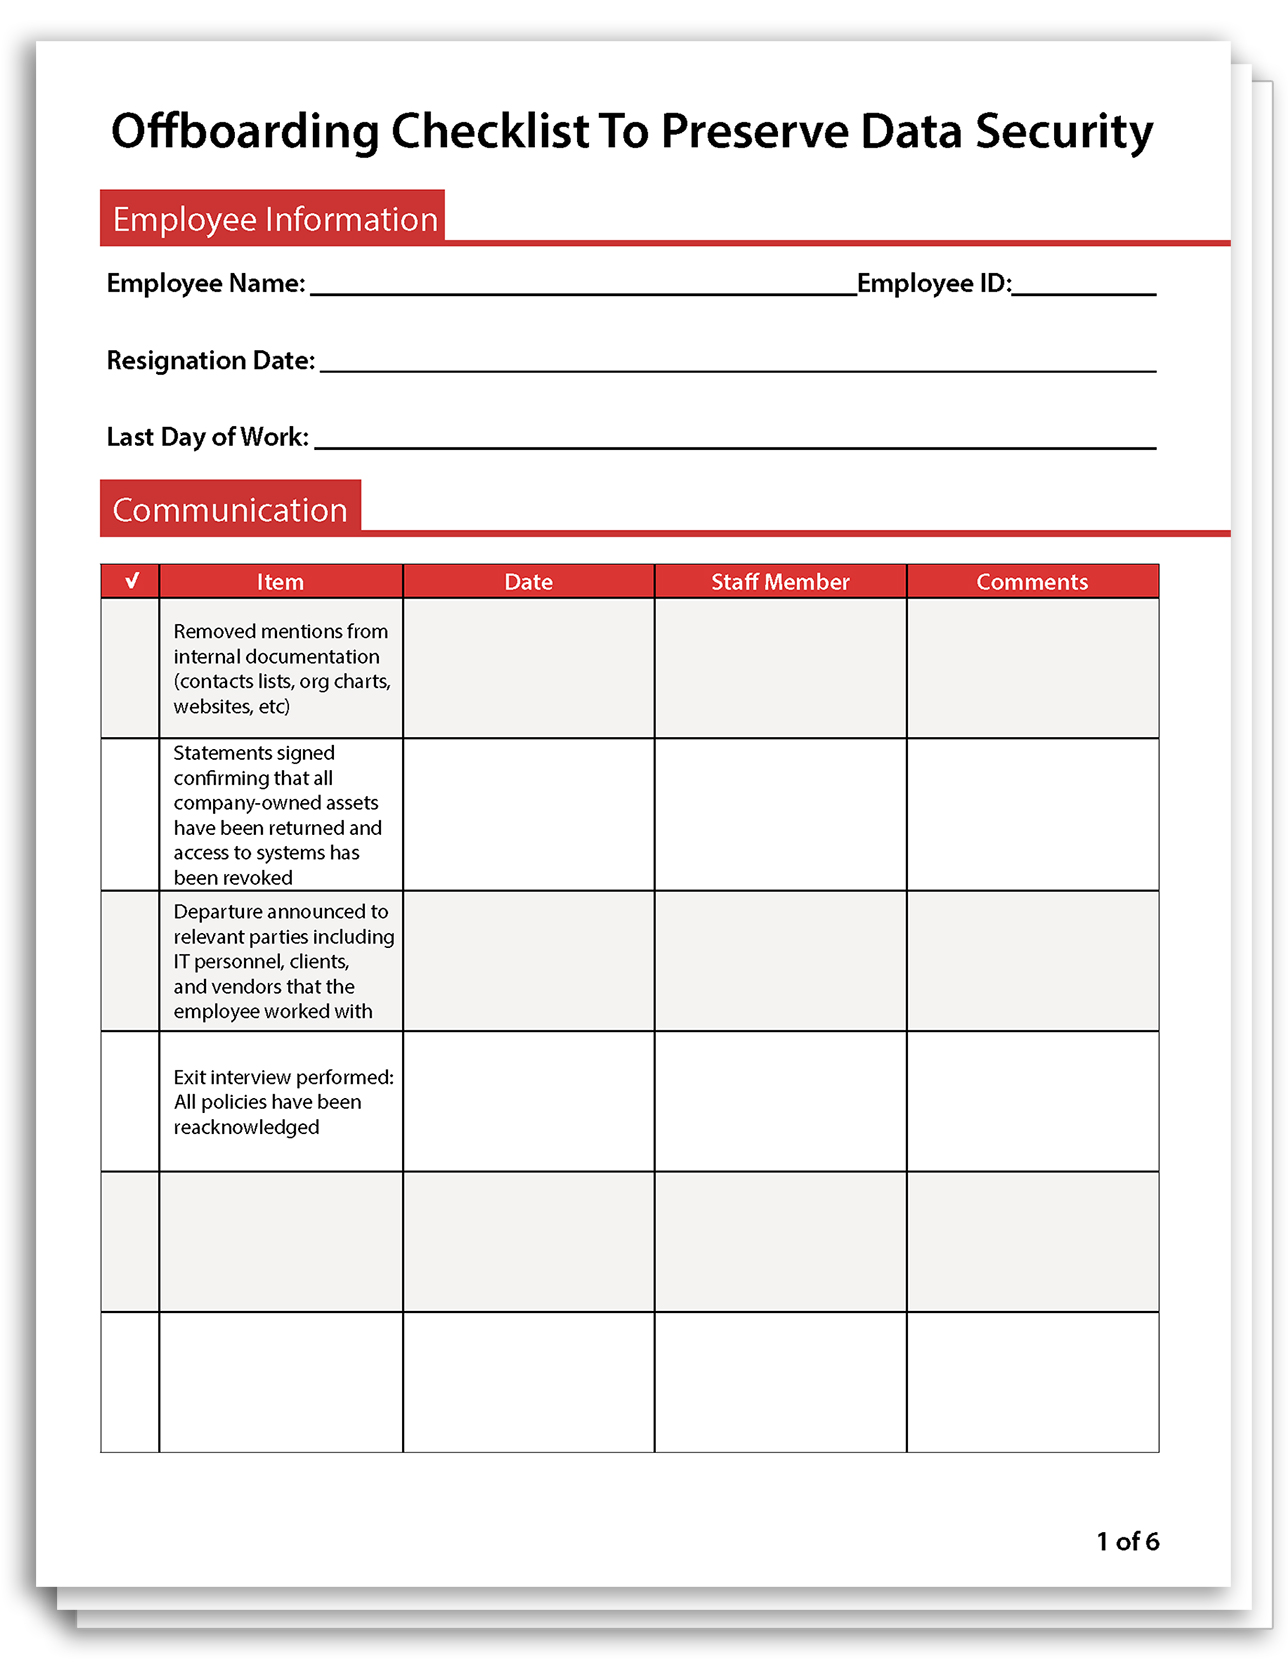 employee offboarding checklist with fields for employee information, checkboxes, date, signature, and comments.